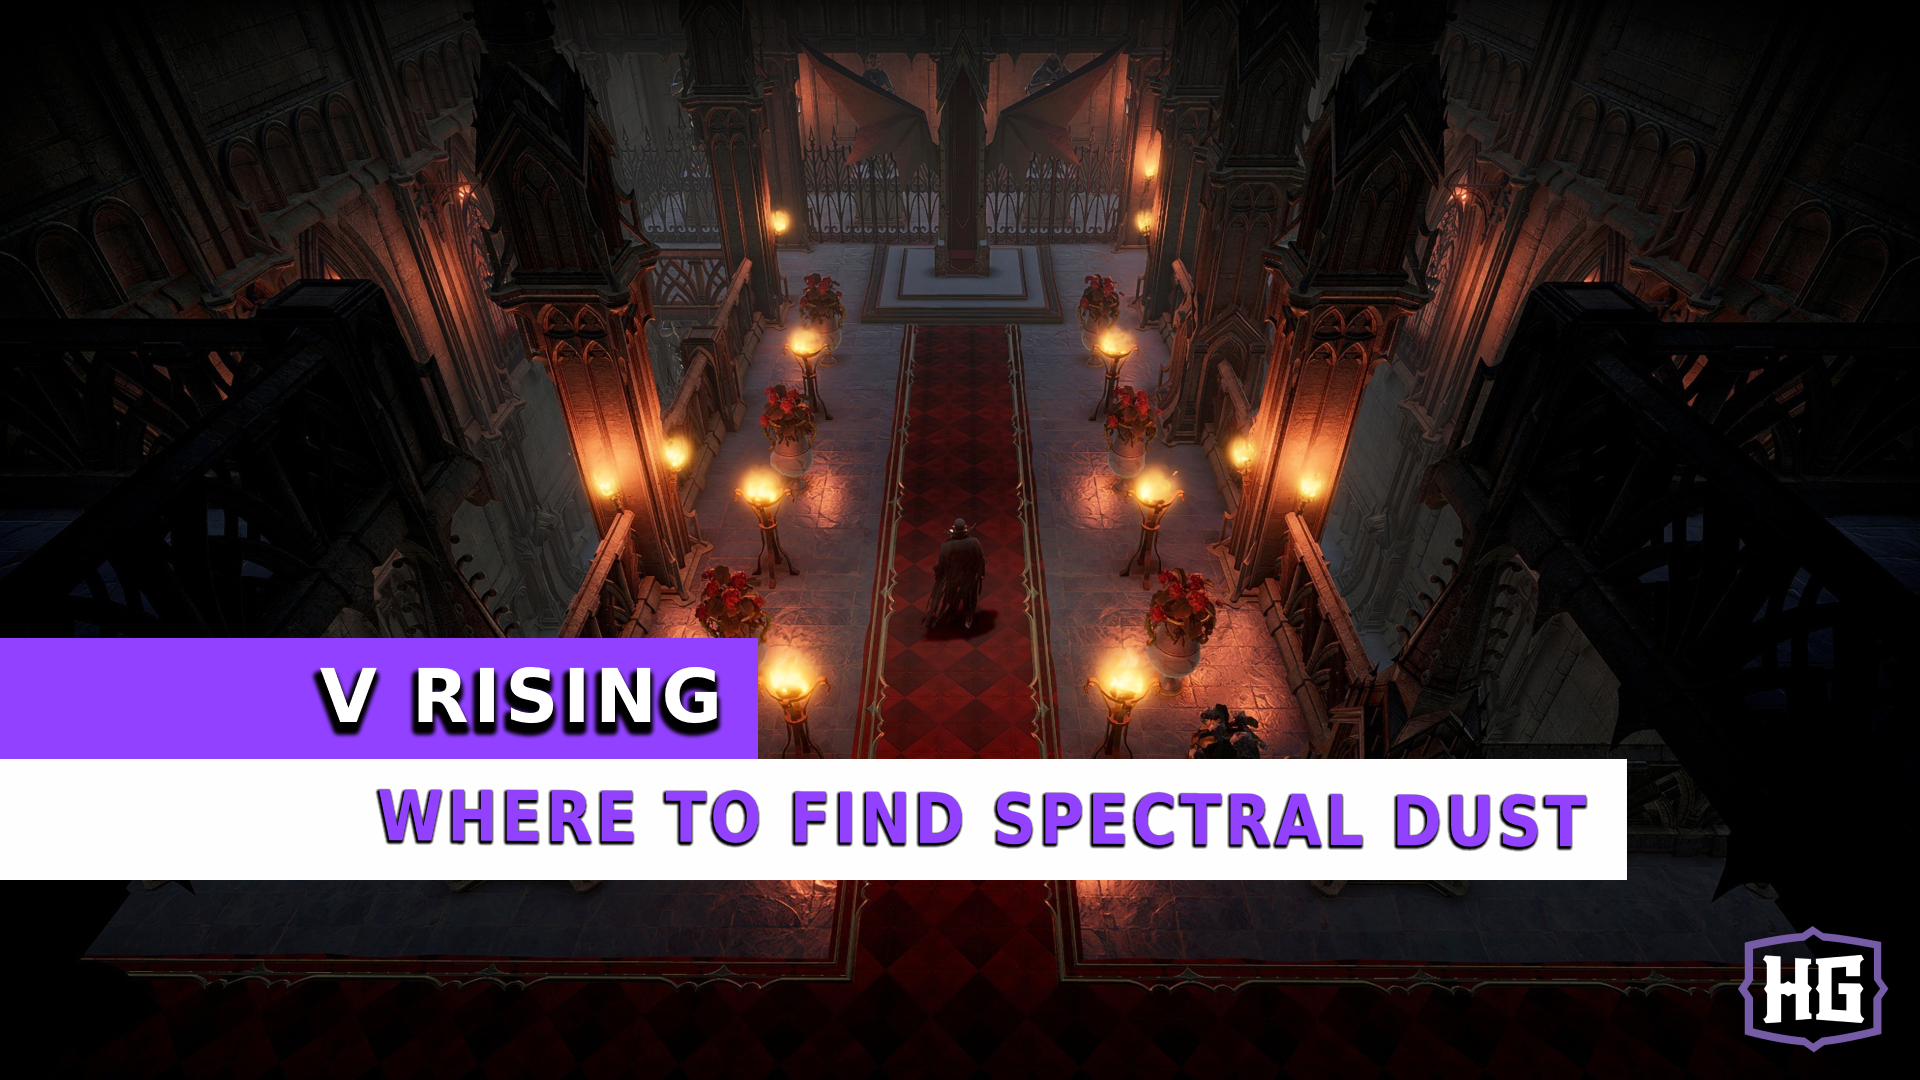 V Rising Where to Find Spectral Dust